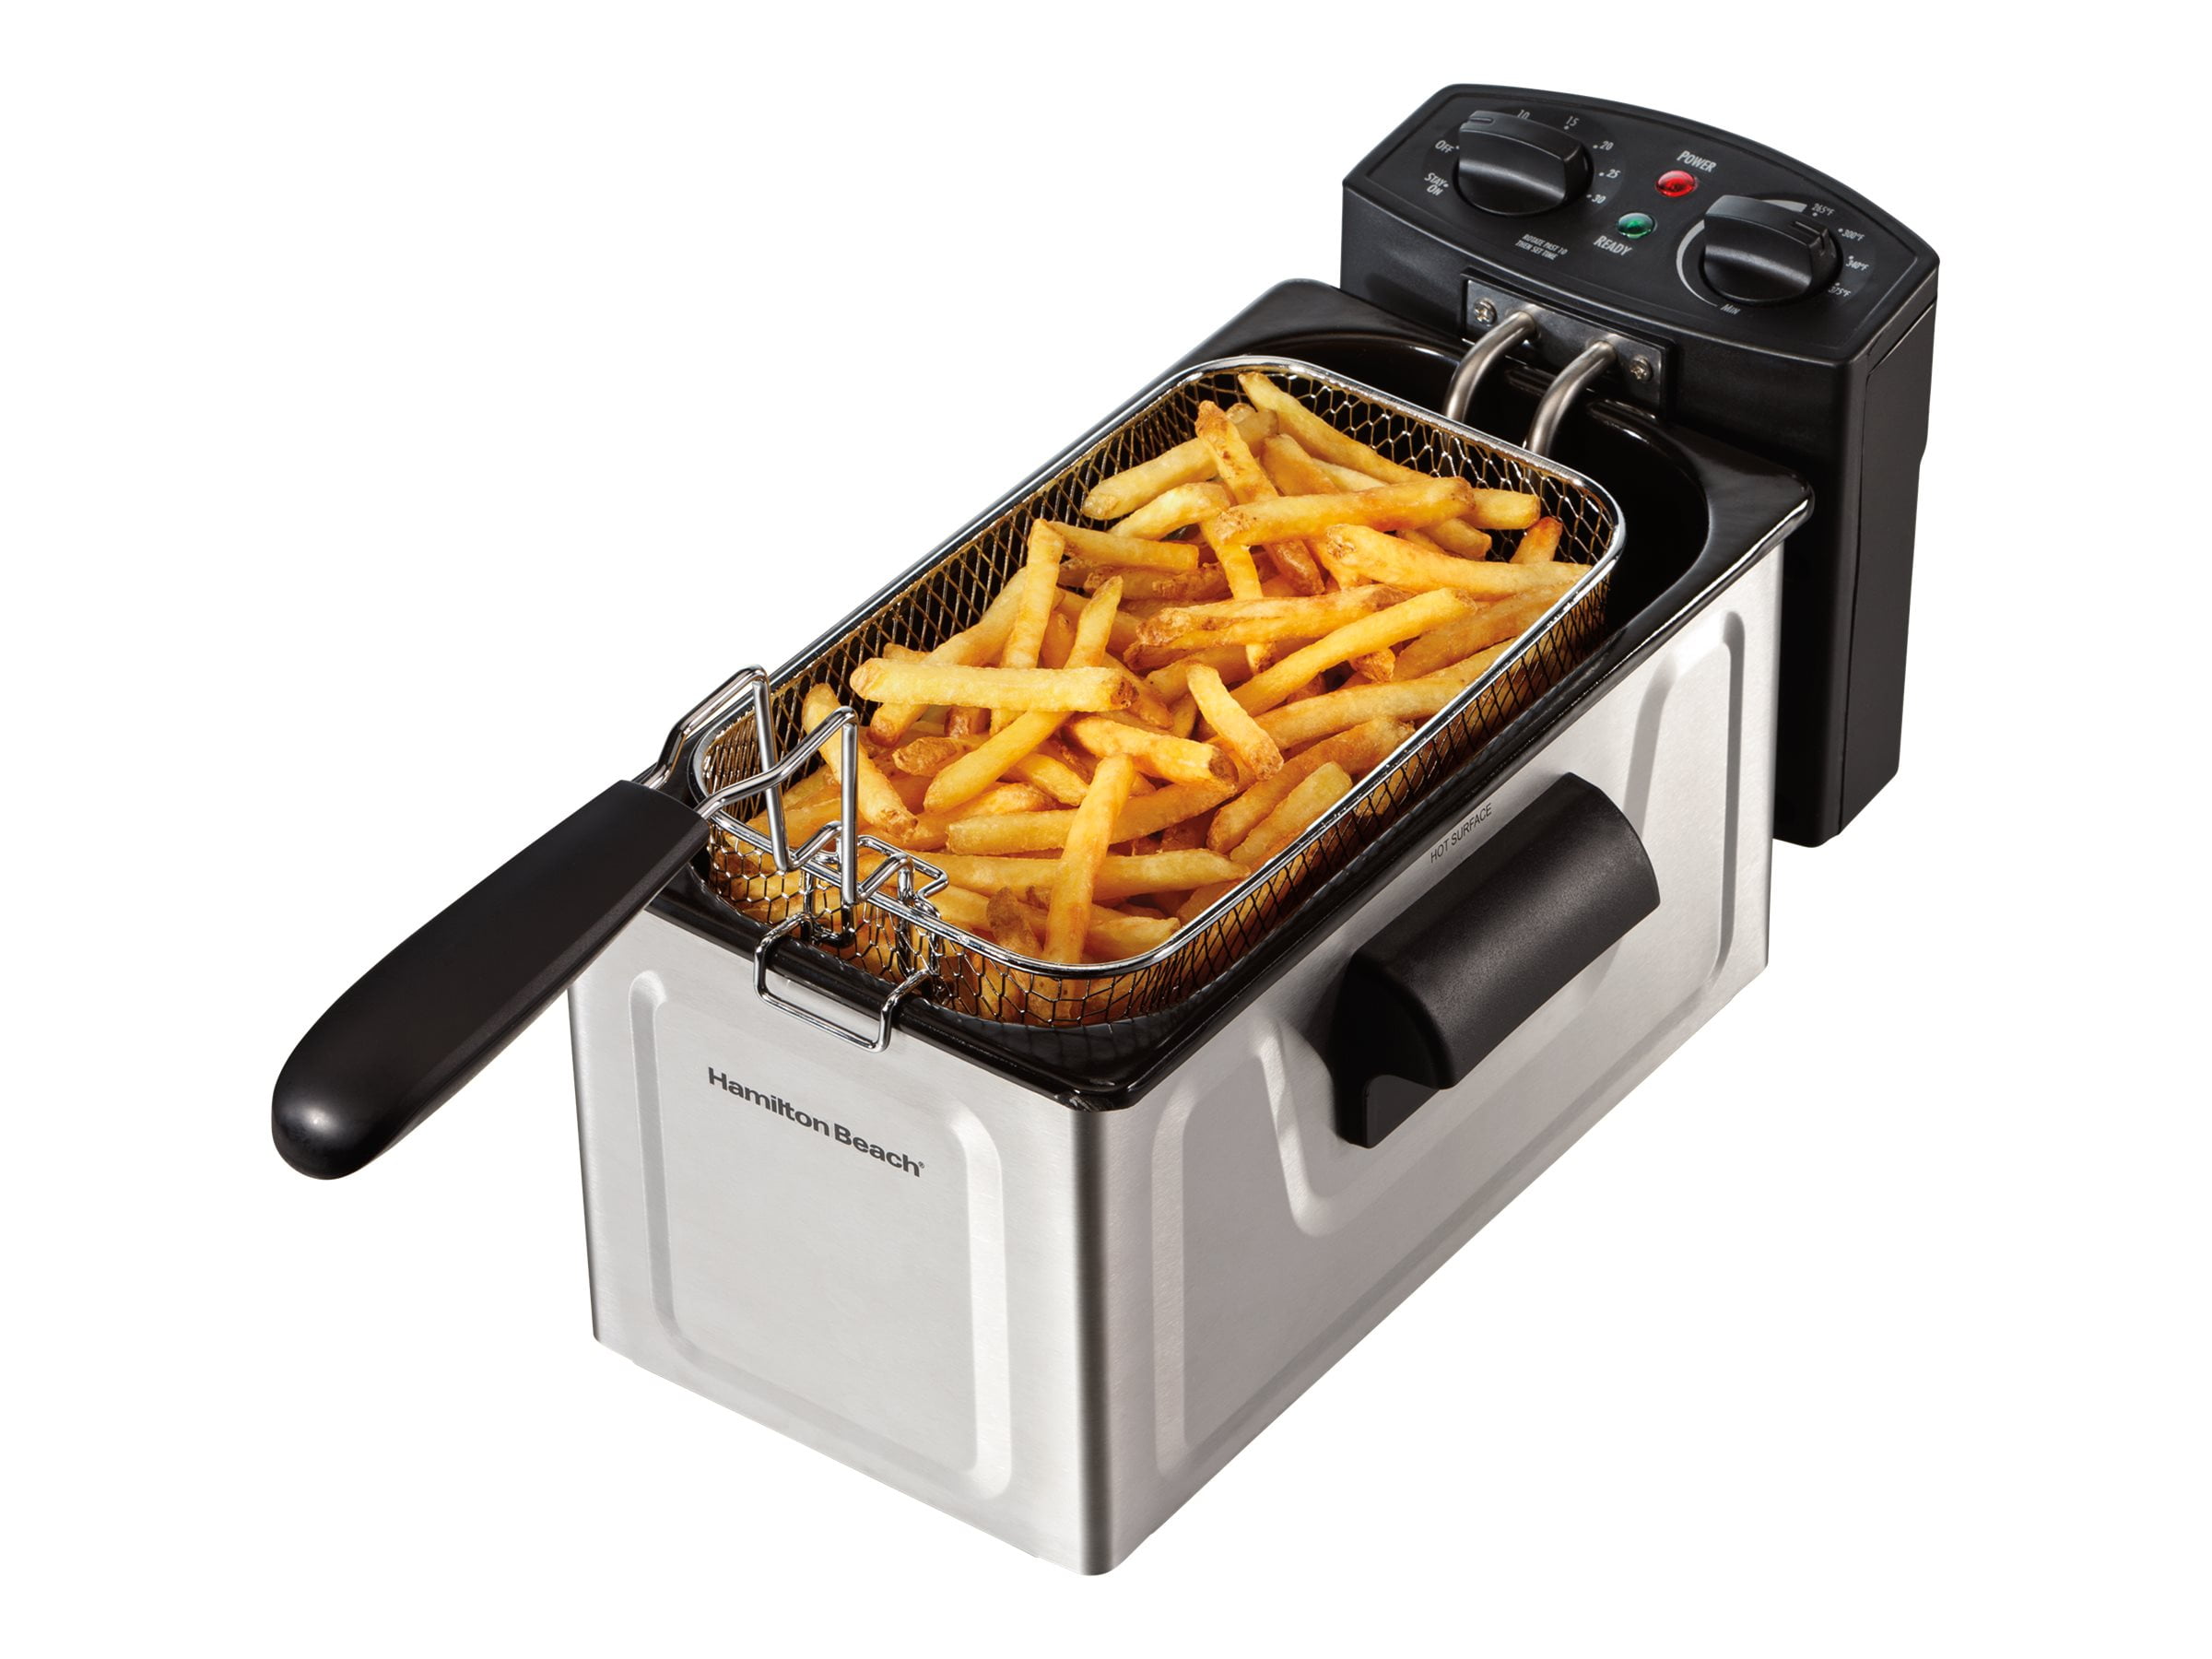 The highly-rated Hamilton Beach 2-Liter Pro Deep Fryer is down to $17 at  Walmart (Reg. up to $35)